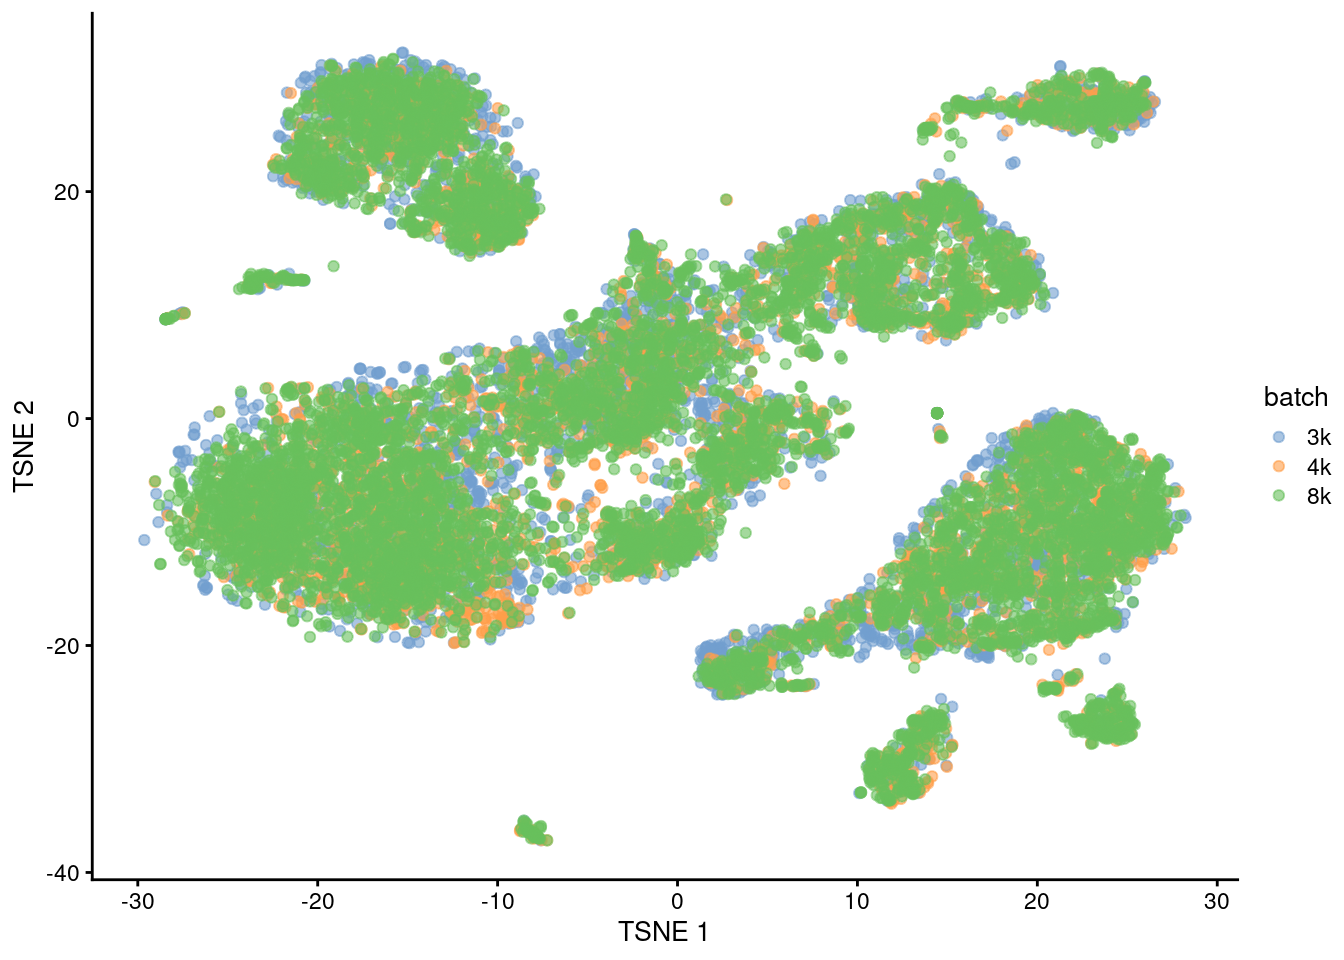 Yet another $t$-SNE plot of the PBMC datasets after MNN correction. Each point is a cell that is colored according to its batch of origin.